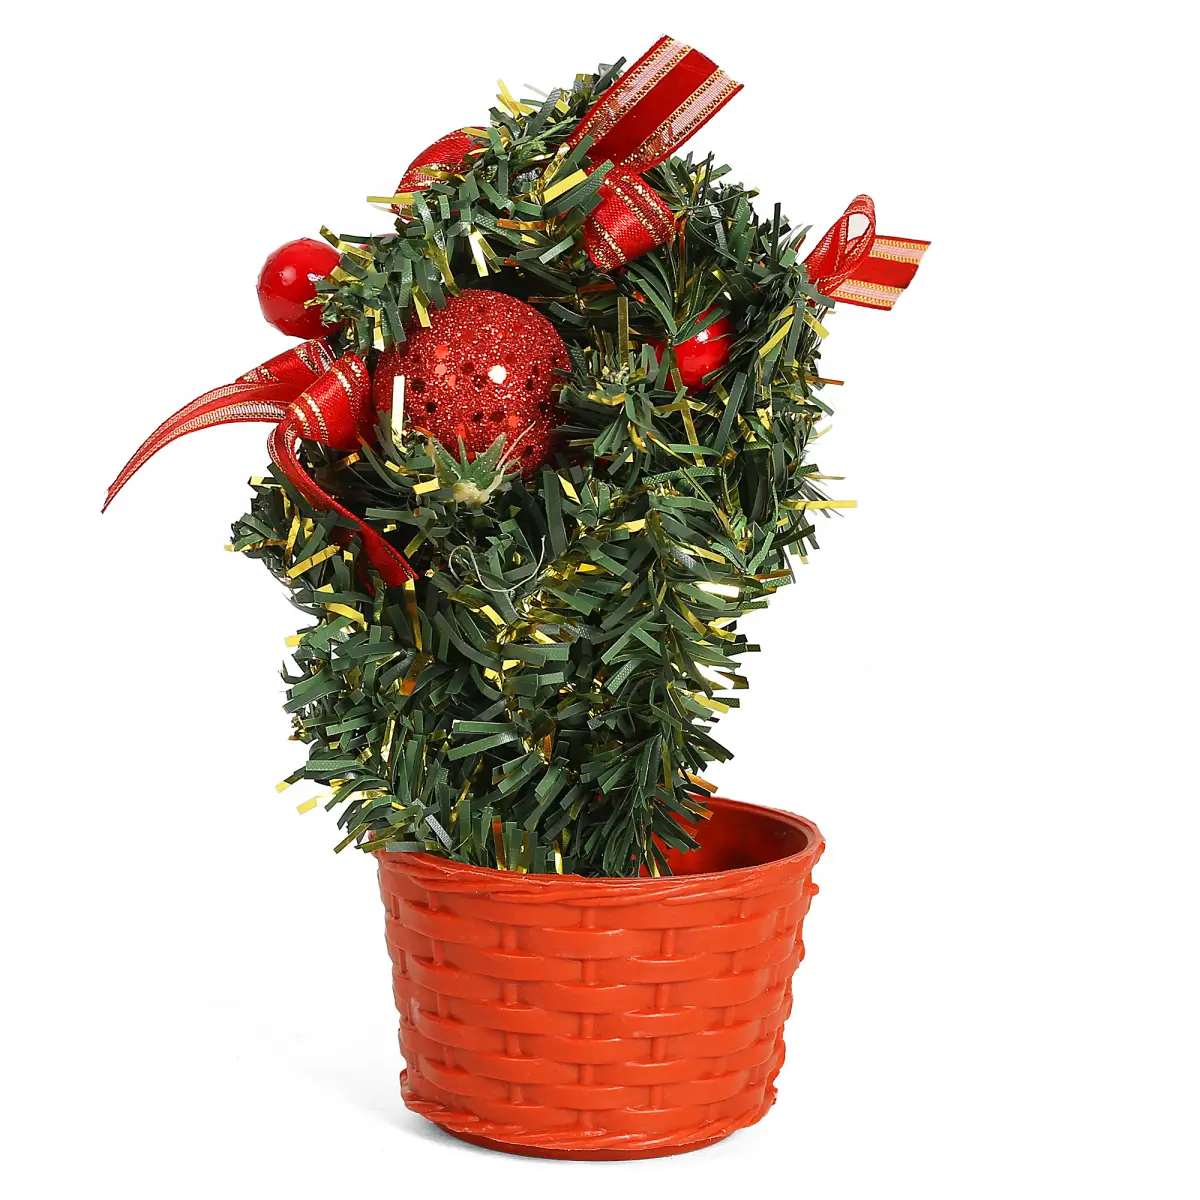 Boing Christmas Tree Decorations, 20cm, Red